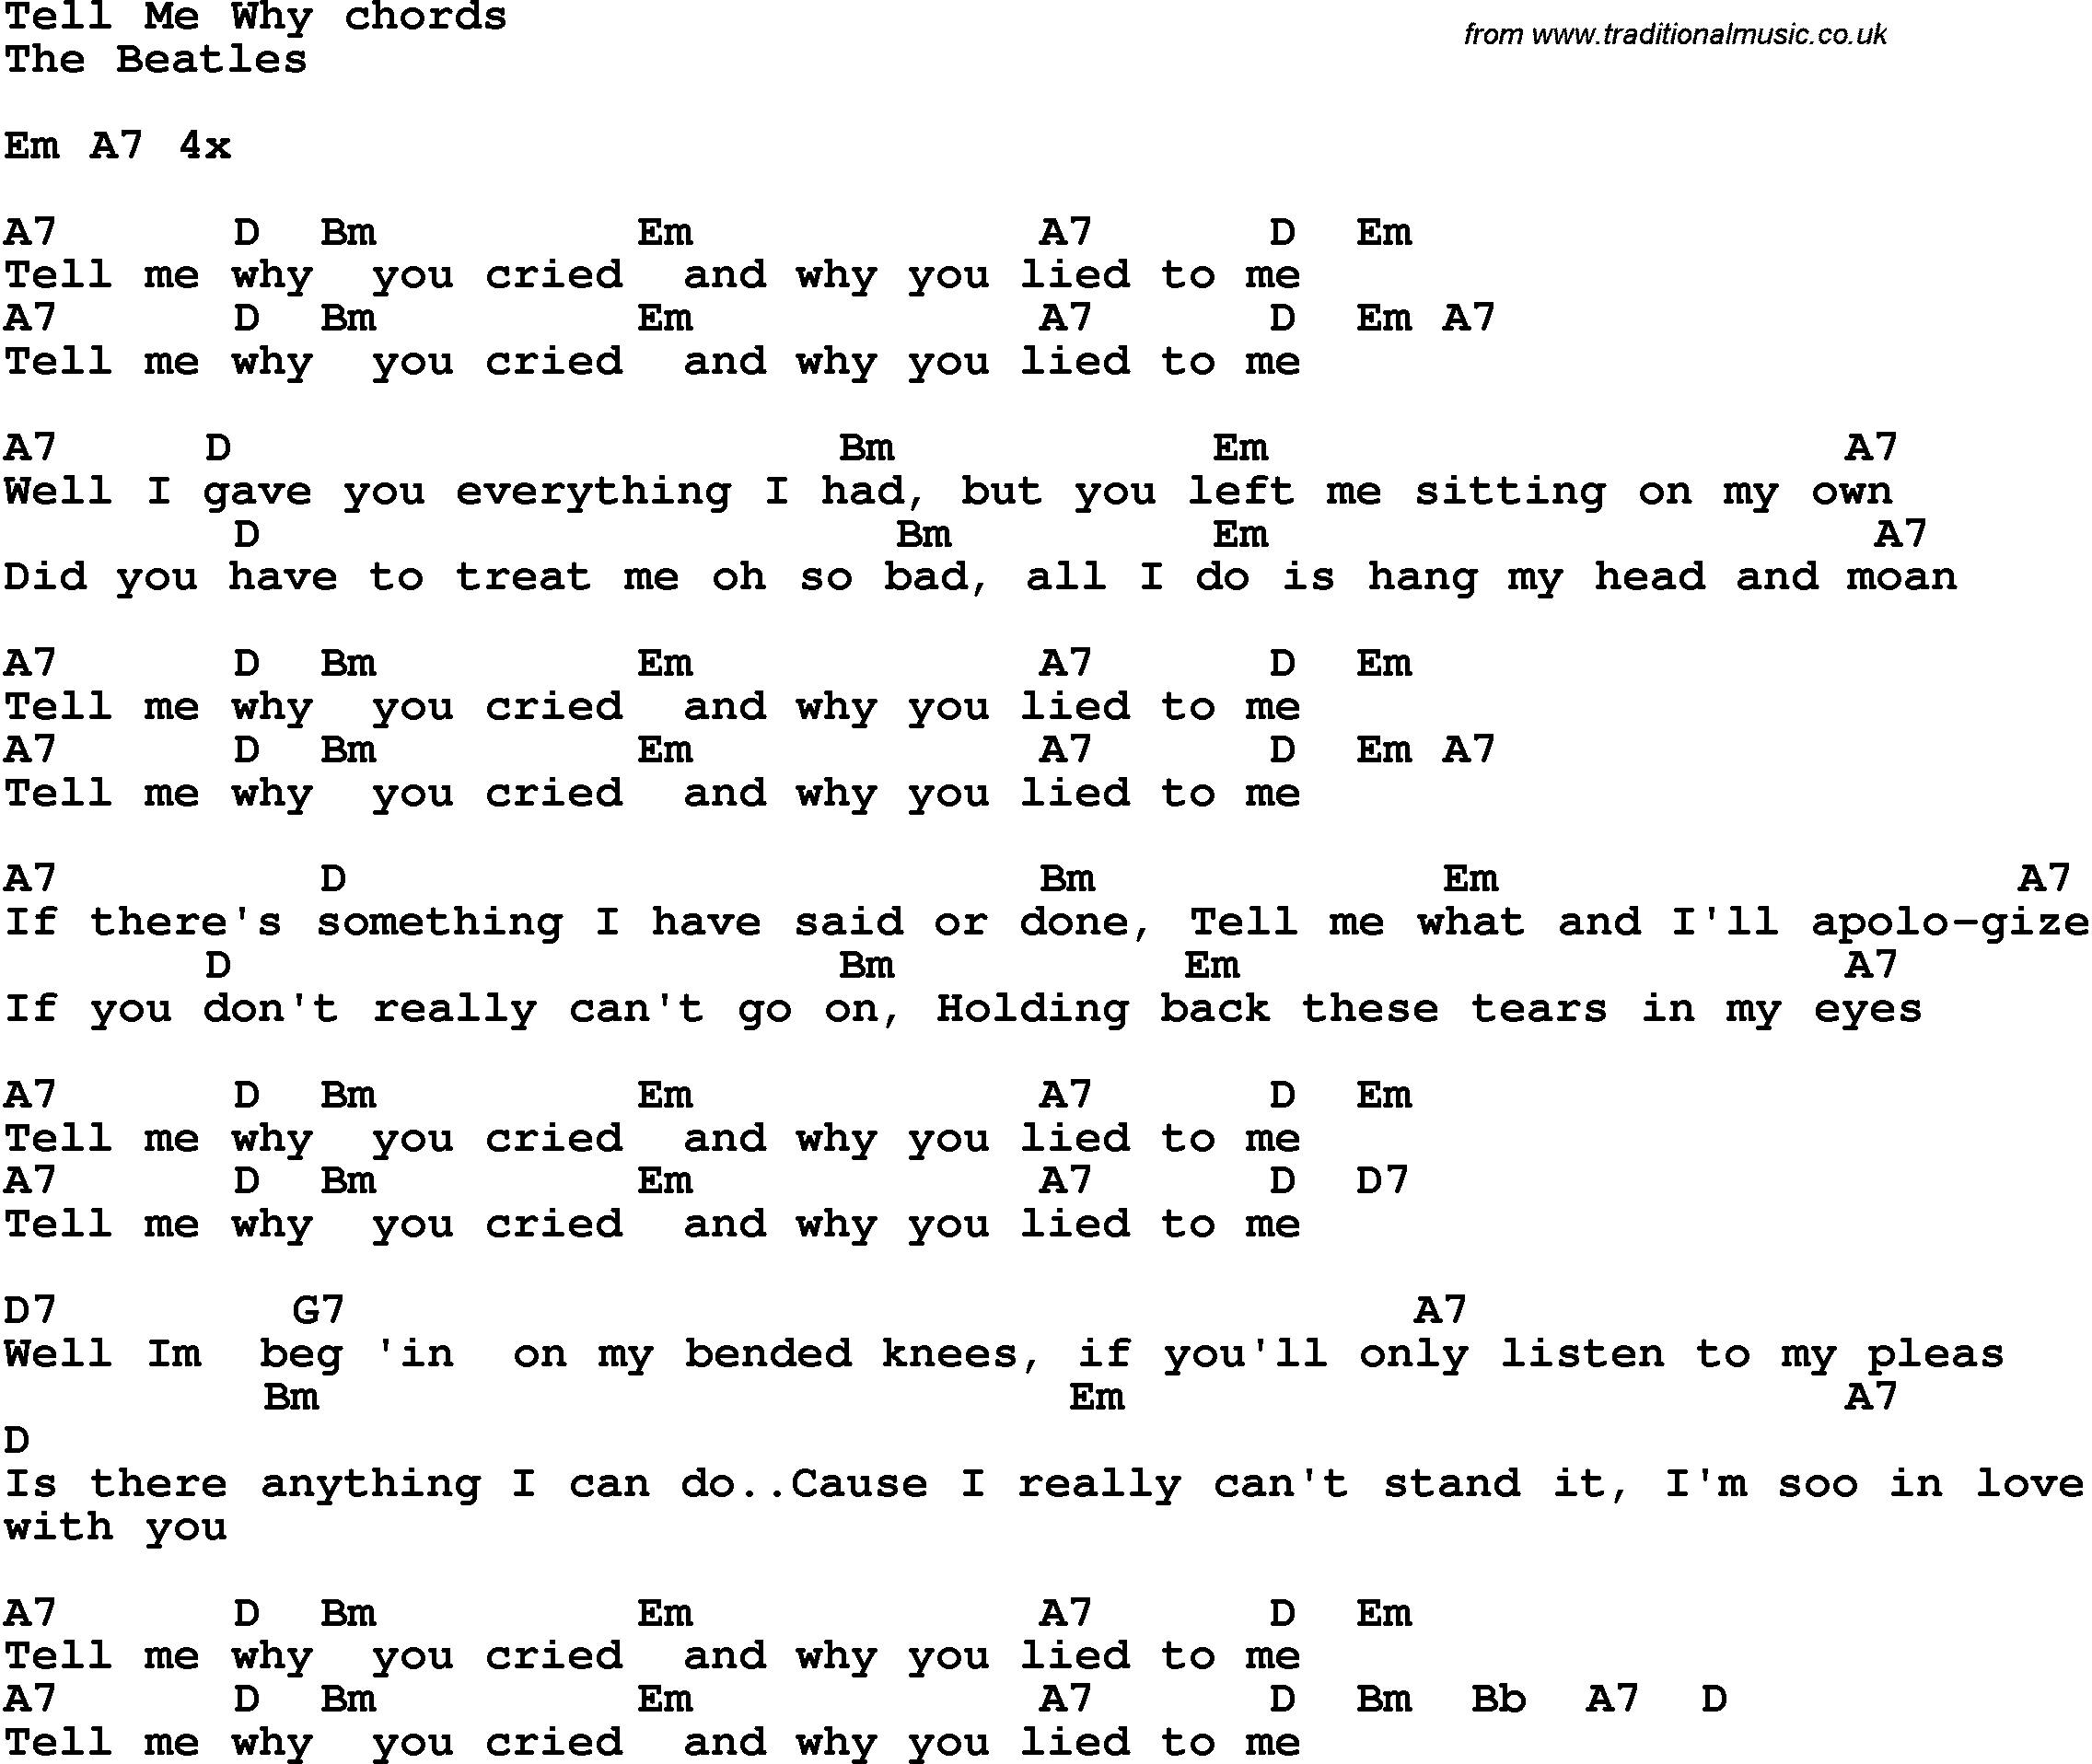 Song Lyrics with guitar chords for Tell Me Why - The Beatles